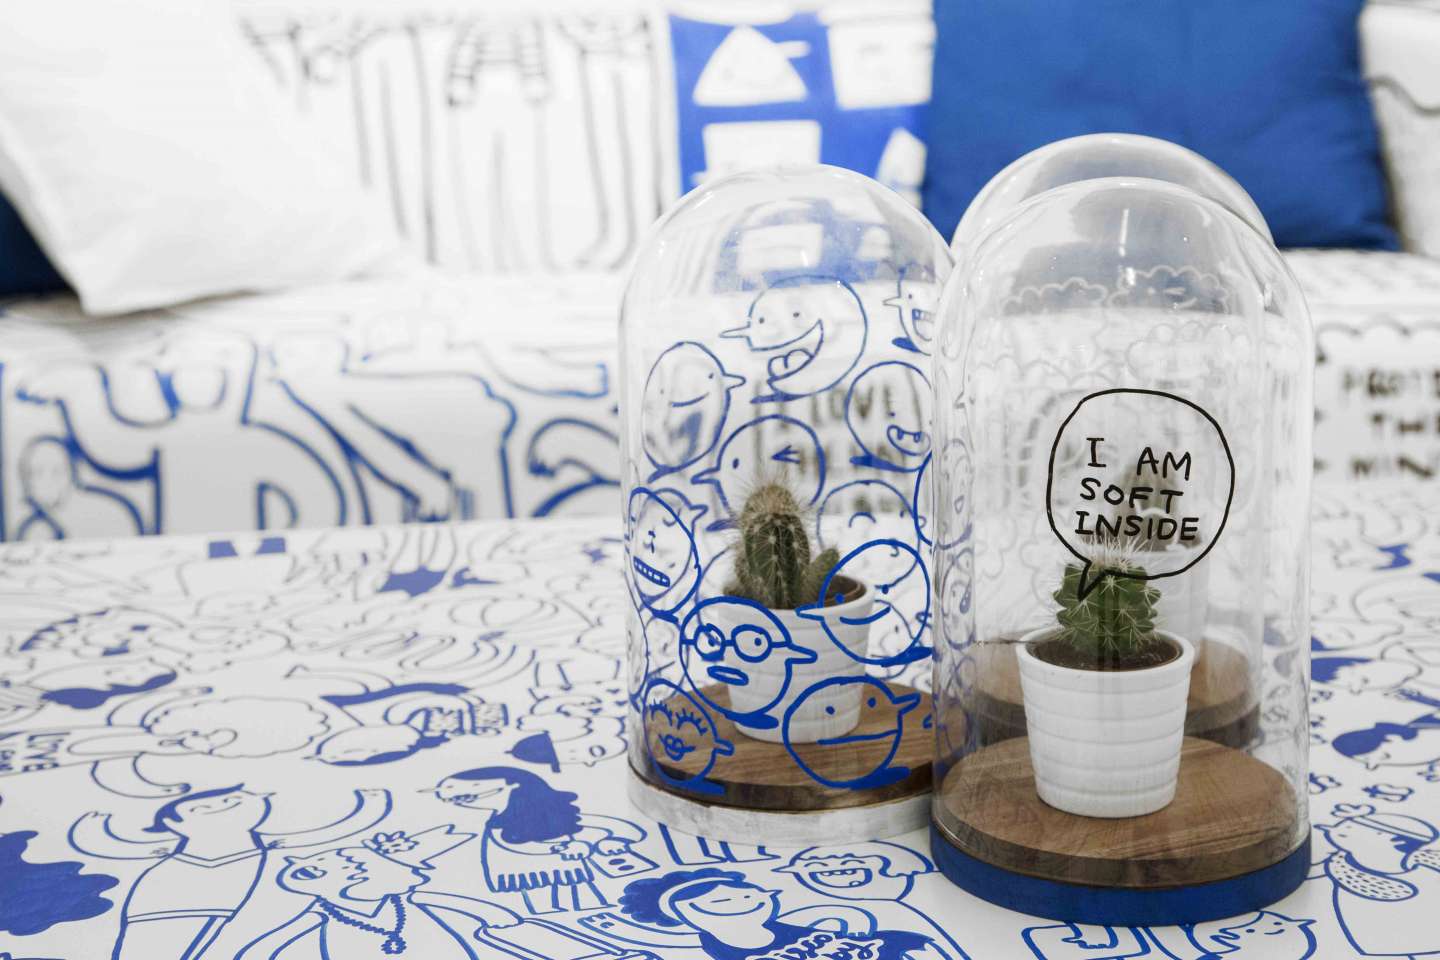 Assembling Reality - This is Amit X IKEA x Colette 